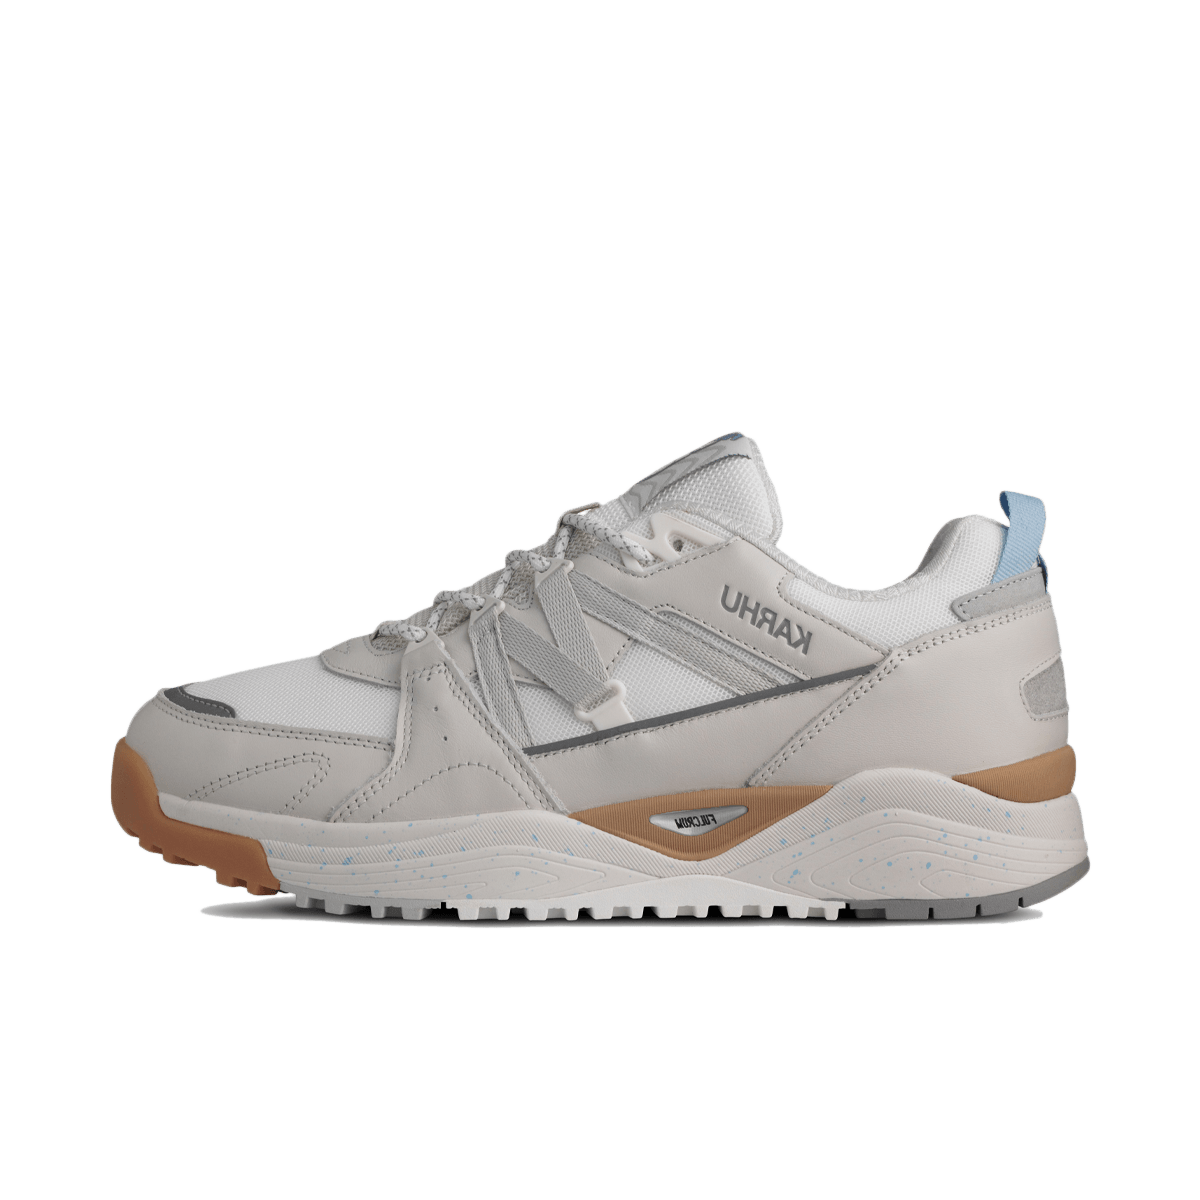 Karhu Fusion XC 'Lily White' - Flow State Pack F830008